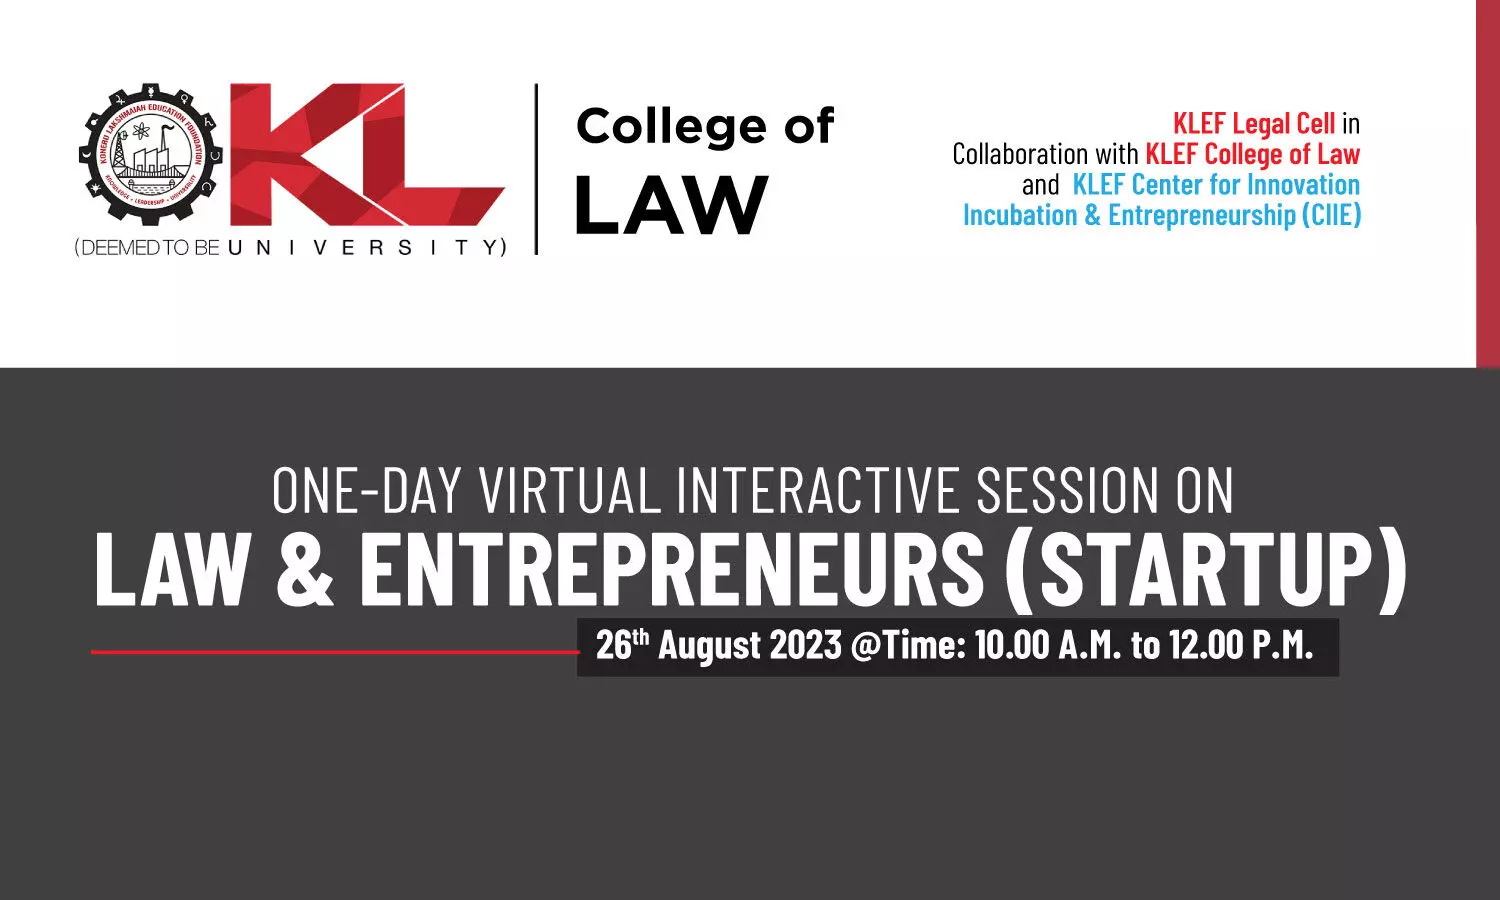 One-Day Virtual Interactive Session: Law & Entrepreneurs | KLEF College of Law